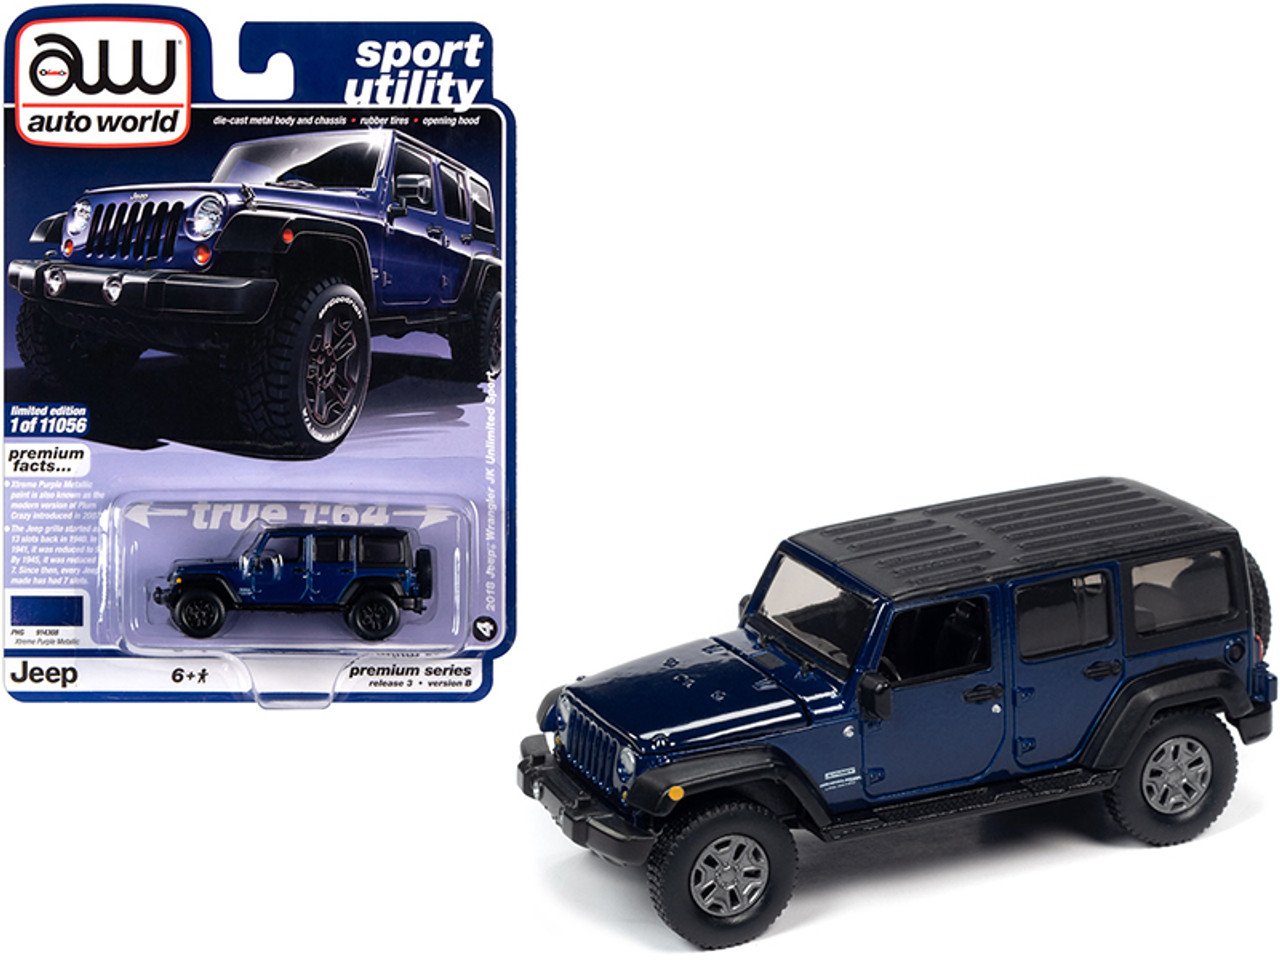 2018 Jeep Wrangler JK Unlimited Sport (4-Door) Xtreme Purple Metallic with Black Top "Sport Utility" Limited Edition to 11056 pieces Worldwide 1/64 Diecast Model Car by Autoworld